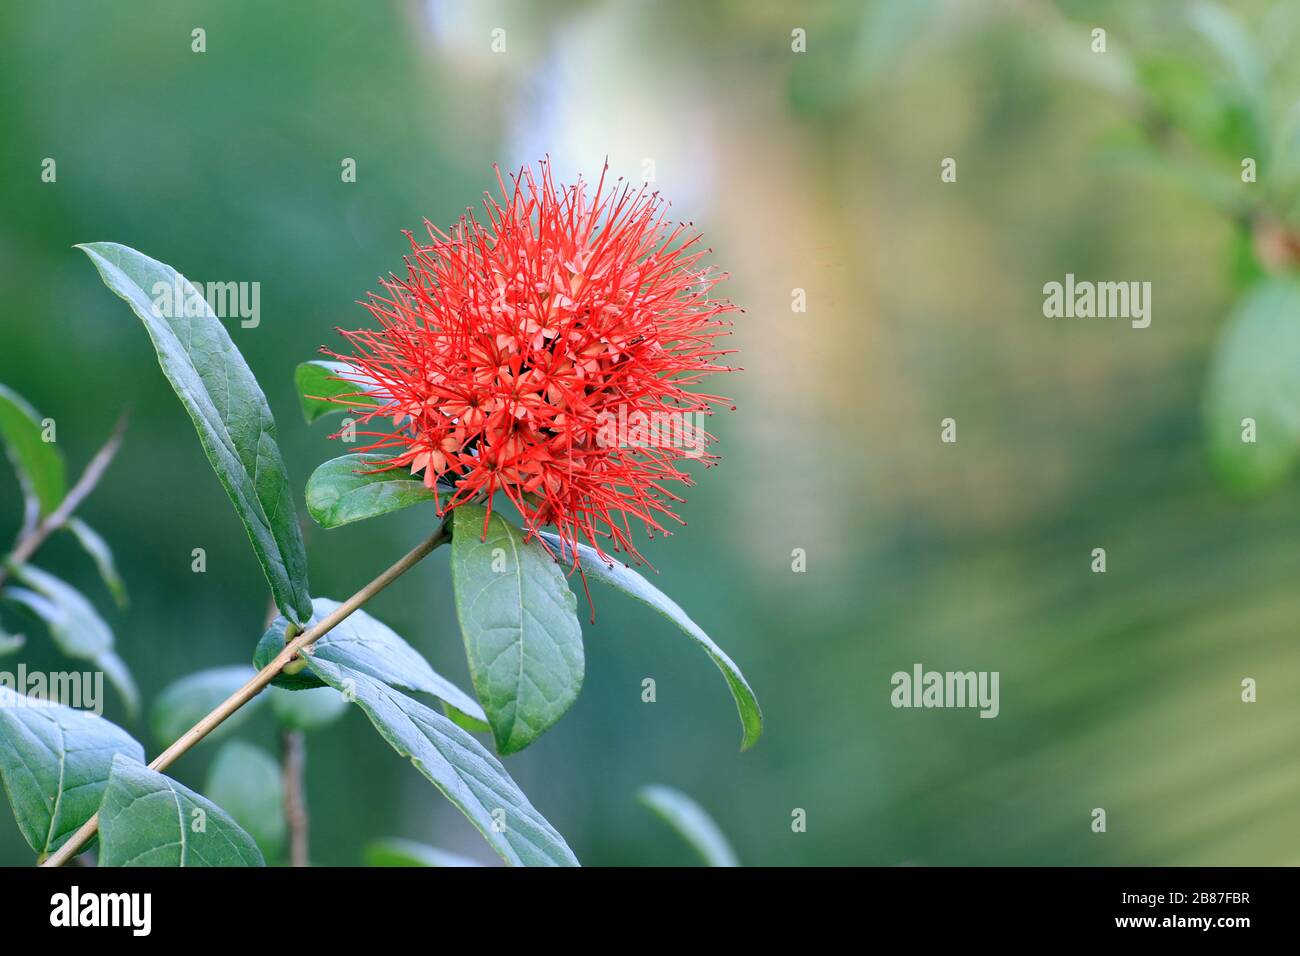 Combretum Constrictum (Latin name), Finger Lies flower, Exotic Spiky Red Flower, Powderpuff combretum flower Stock Photo